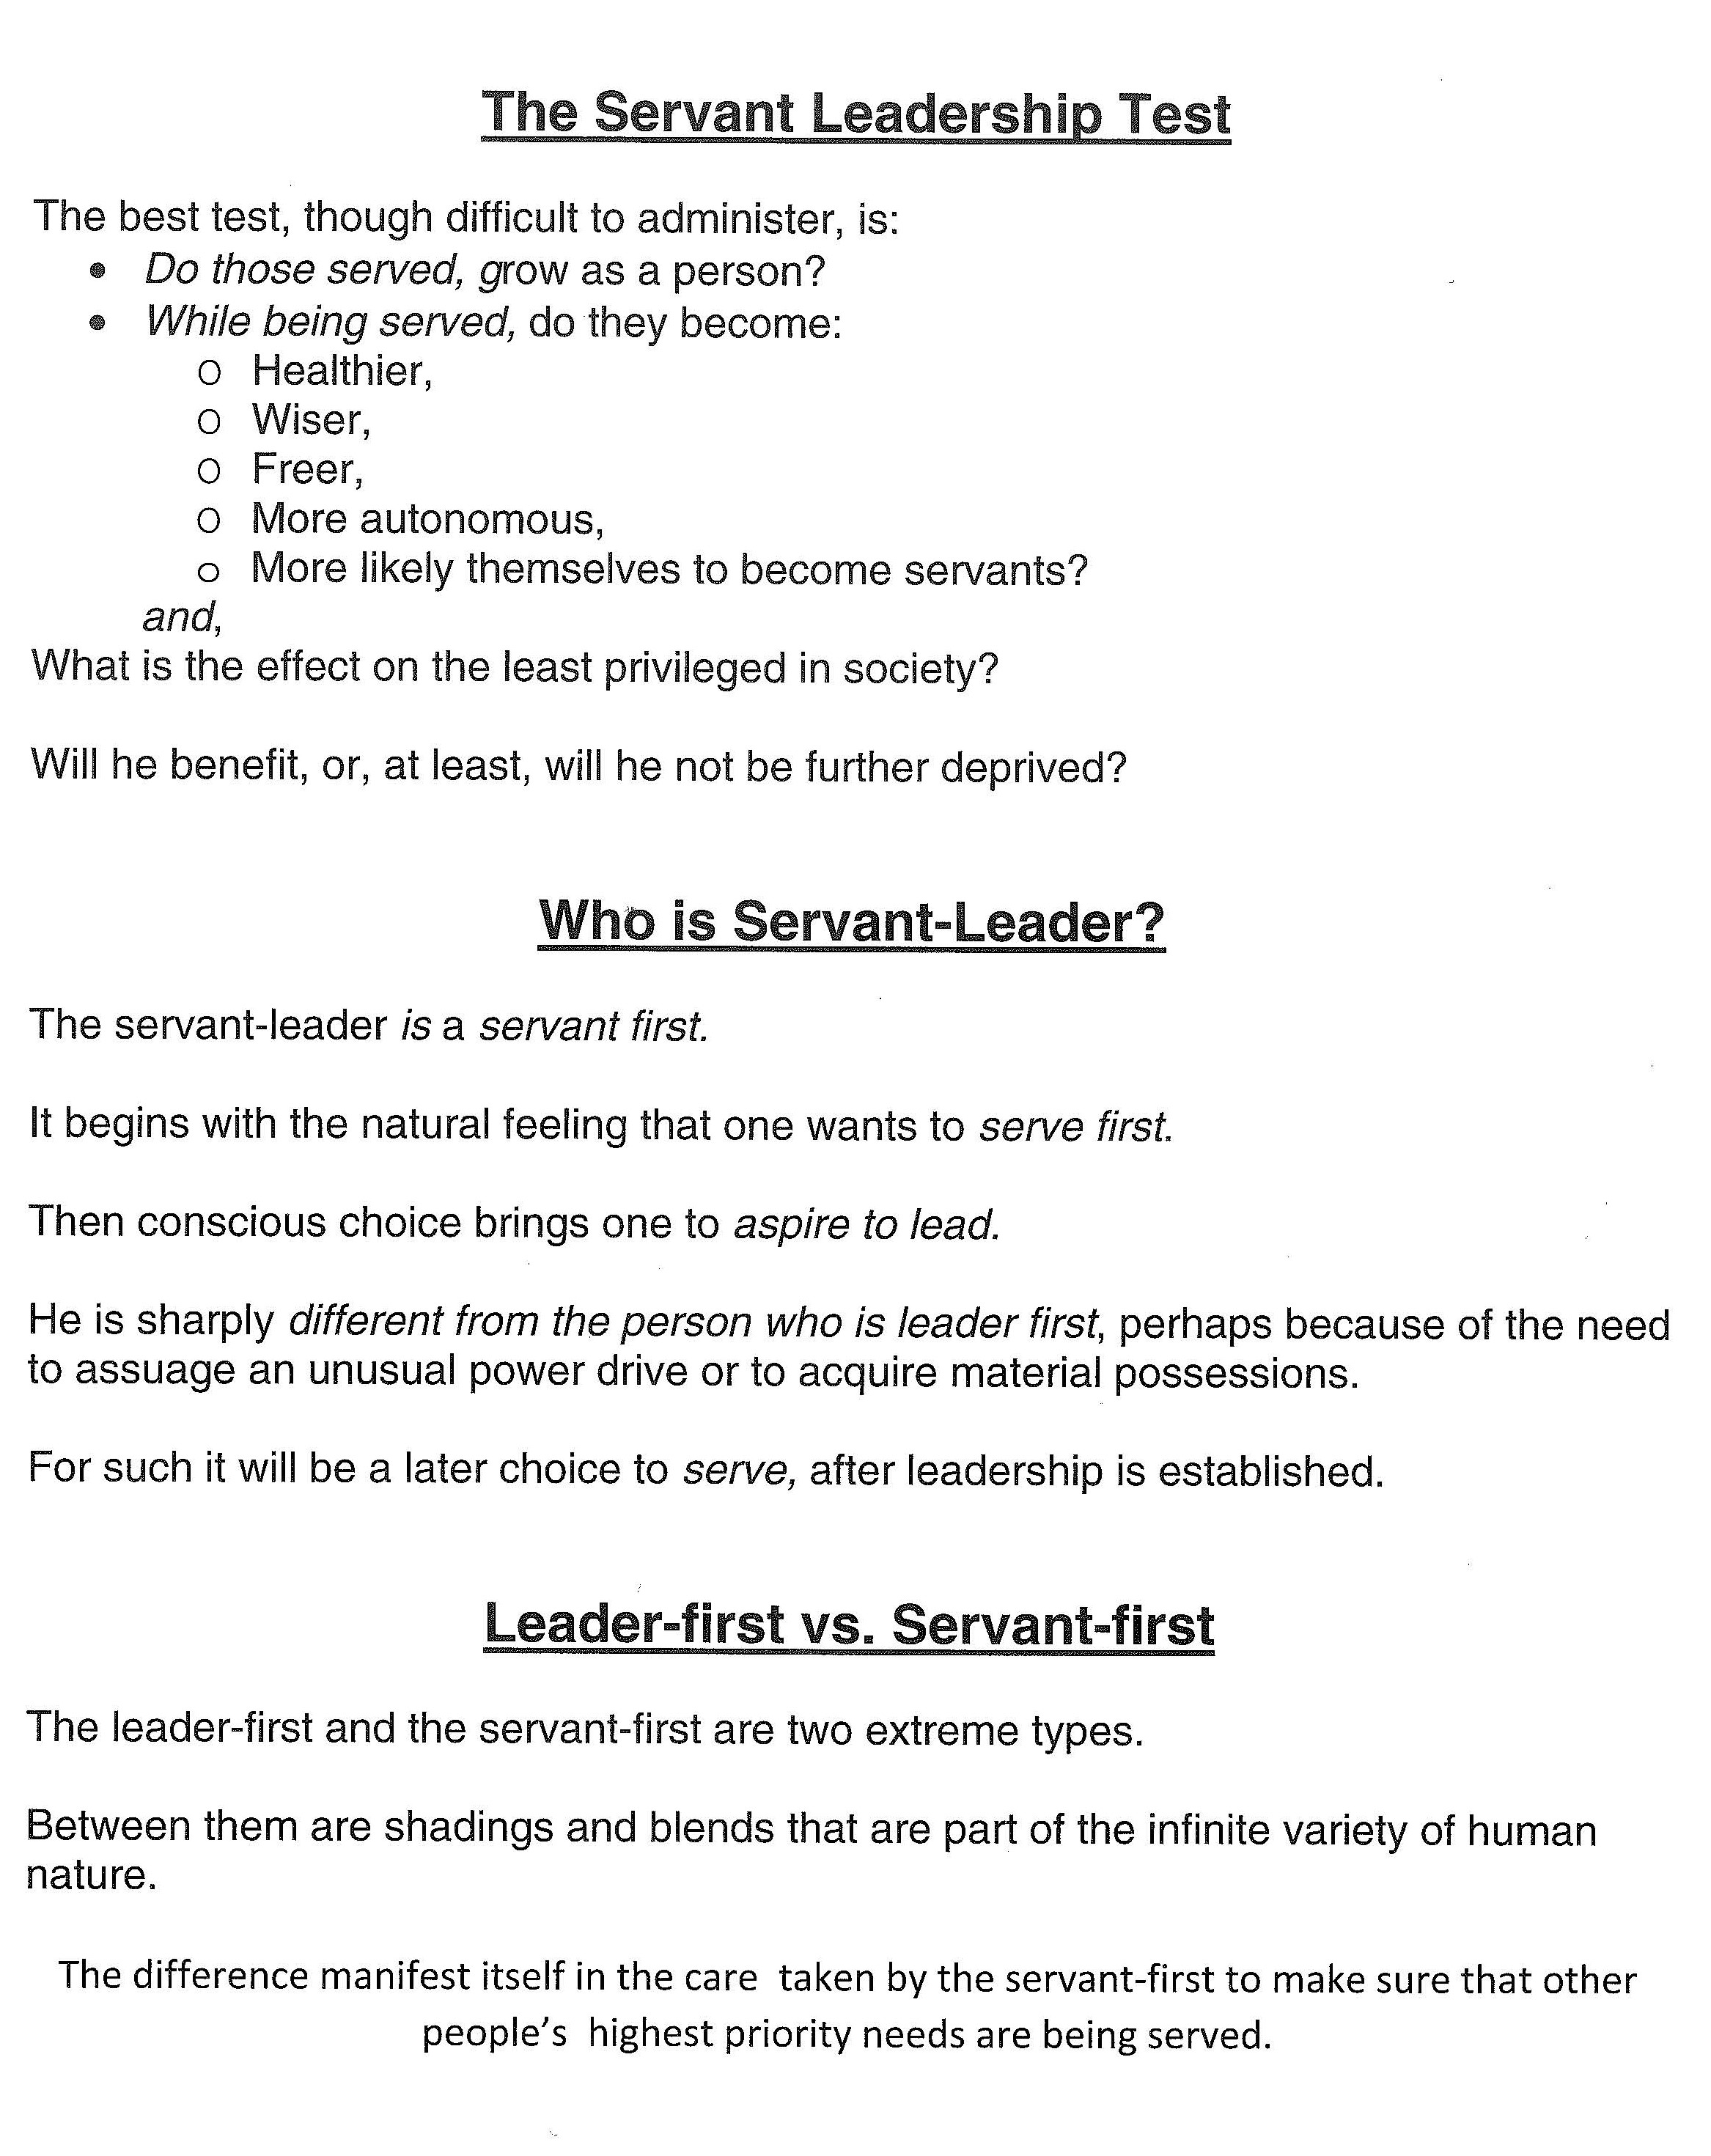 A series of qualities and steps you need to become a servant leader.